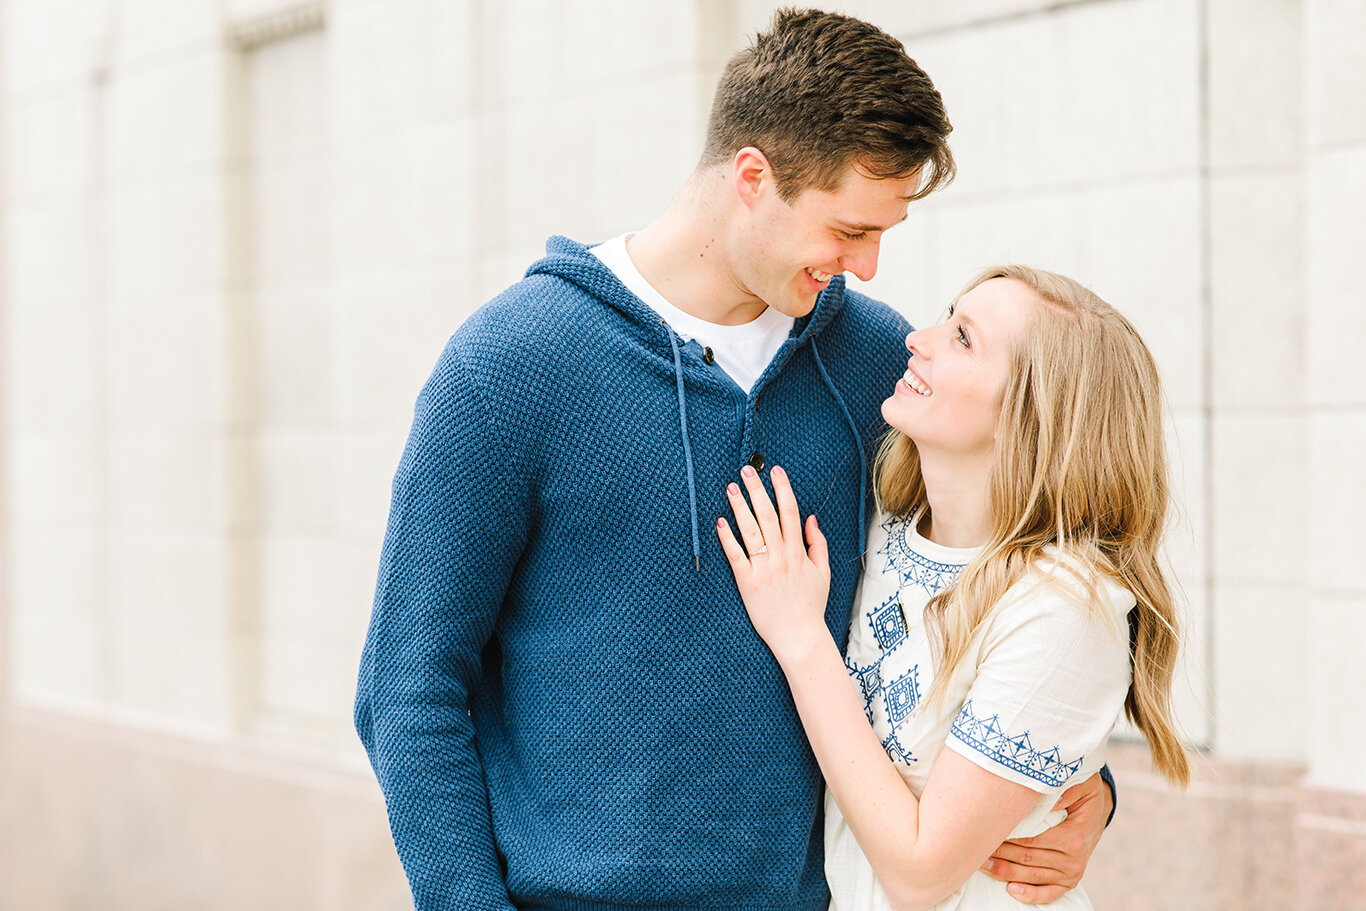  navy blue pullover sweater navy accent solitaire diamond engagement ring loose hanging curls smiles gazing into each others eyes close up photo downtown engagement photo session  salt lake city utah professional utah valley engagement photographer #